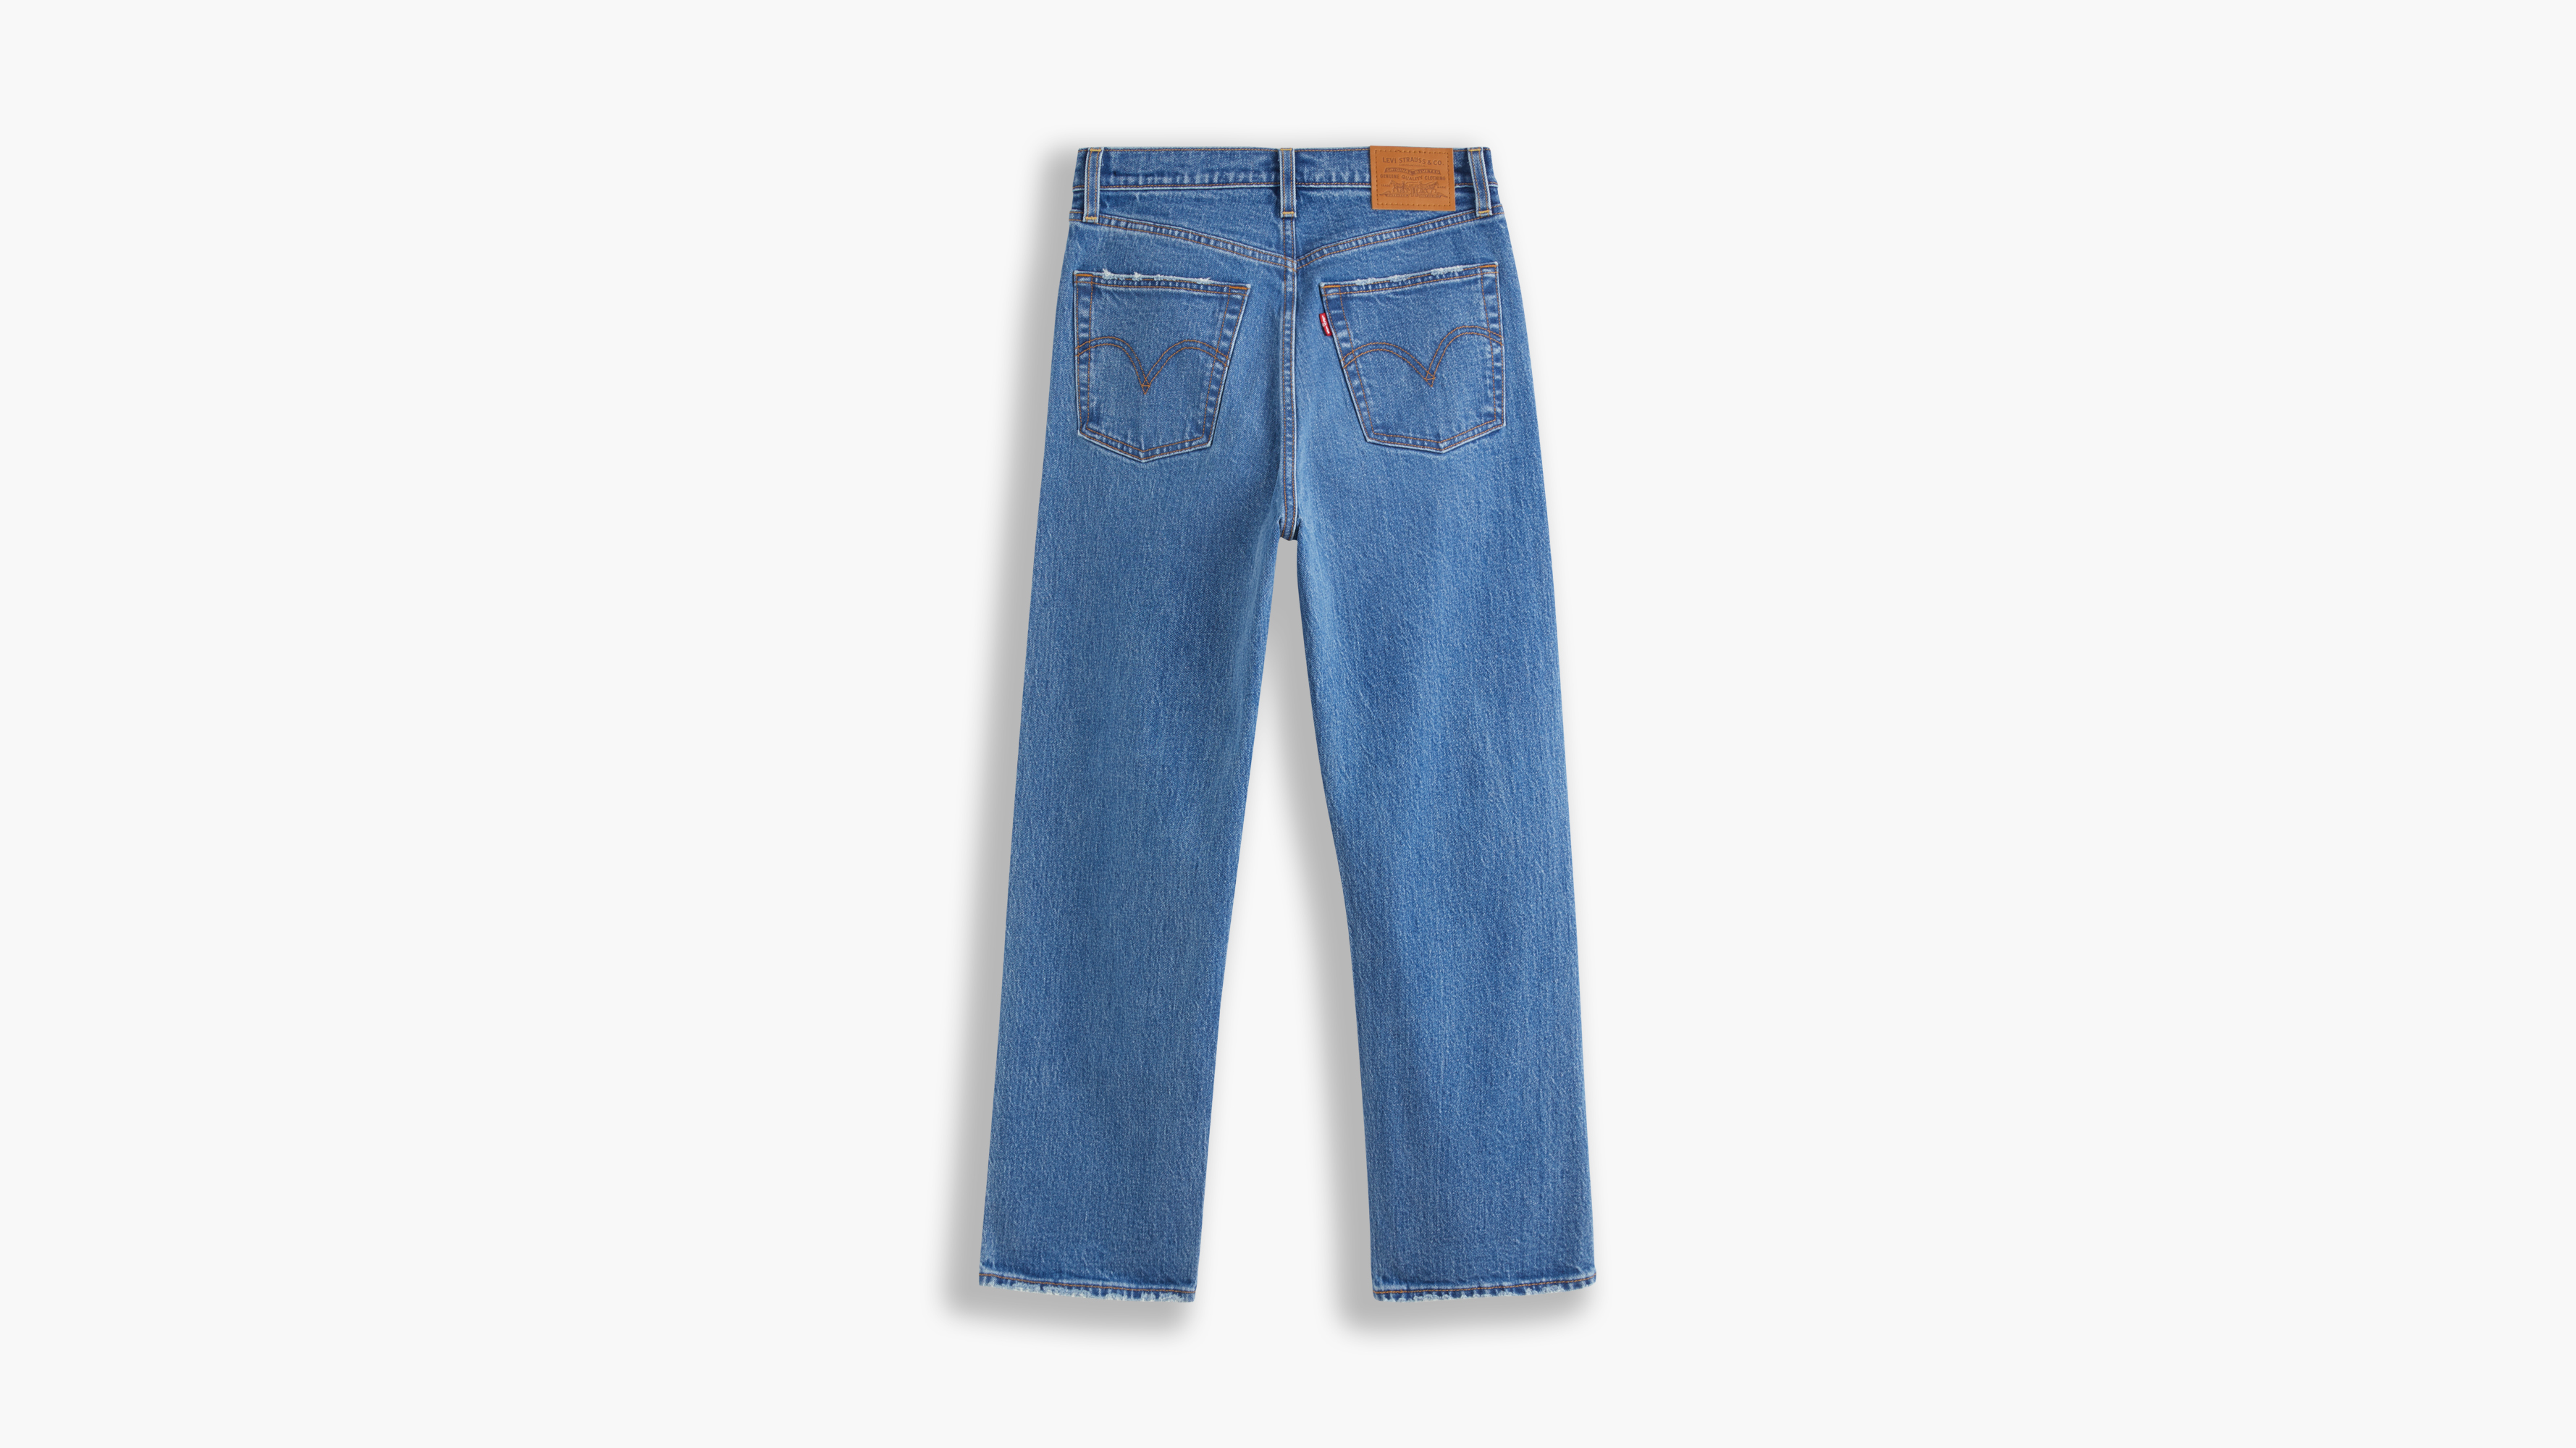  Ribcage Straight Ankle Jeans, Jive Together, 27/27